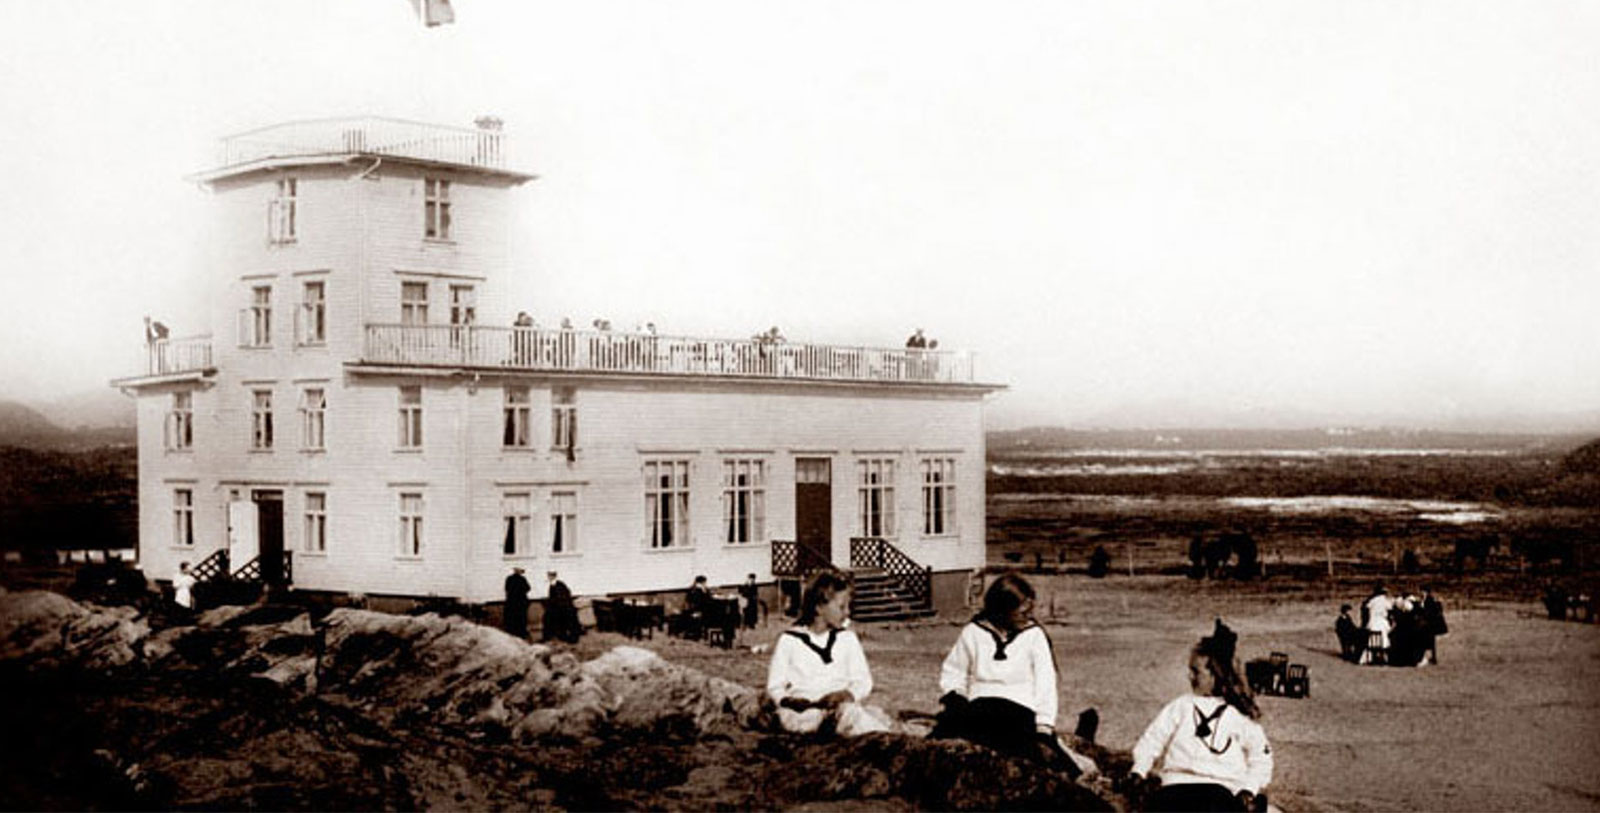 Historic Image of Two Guests on Beach at Sola Strand Hotel, 1914, Member of Historic Hotels Worldwide, in Sola, Norway, Discover